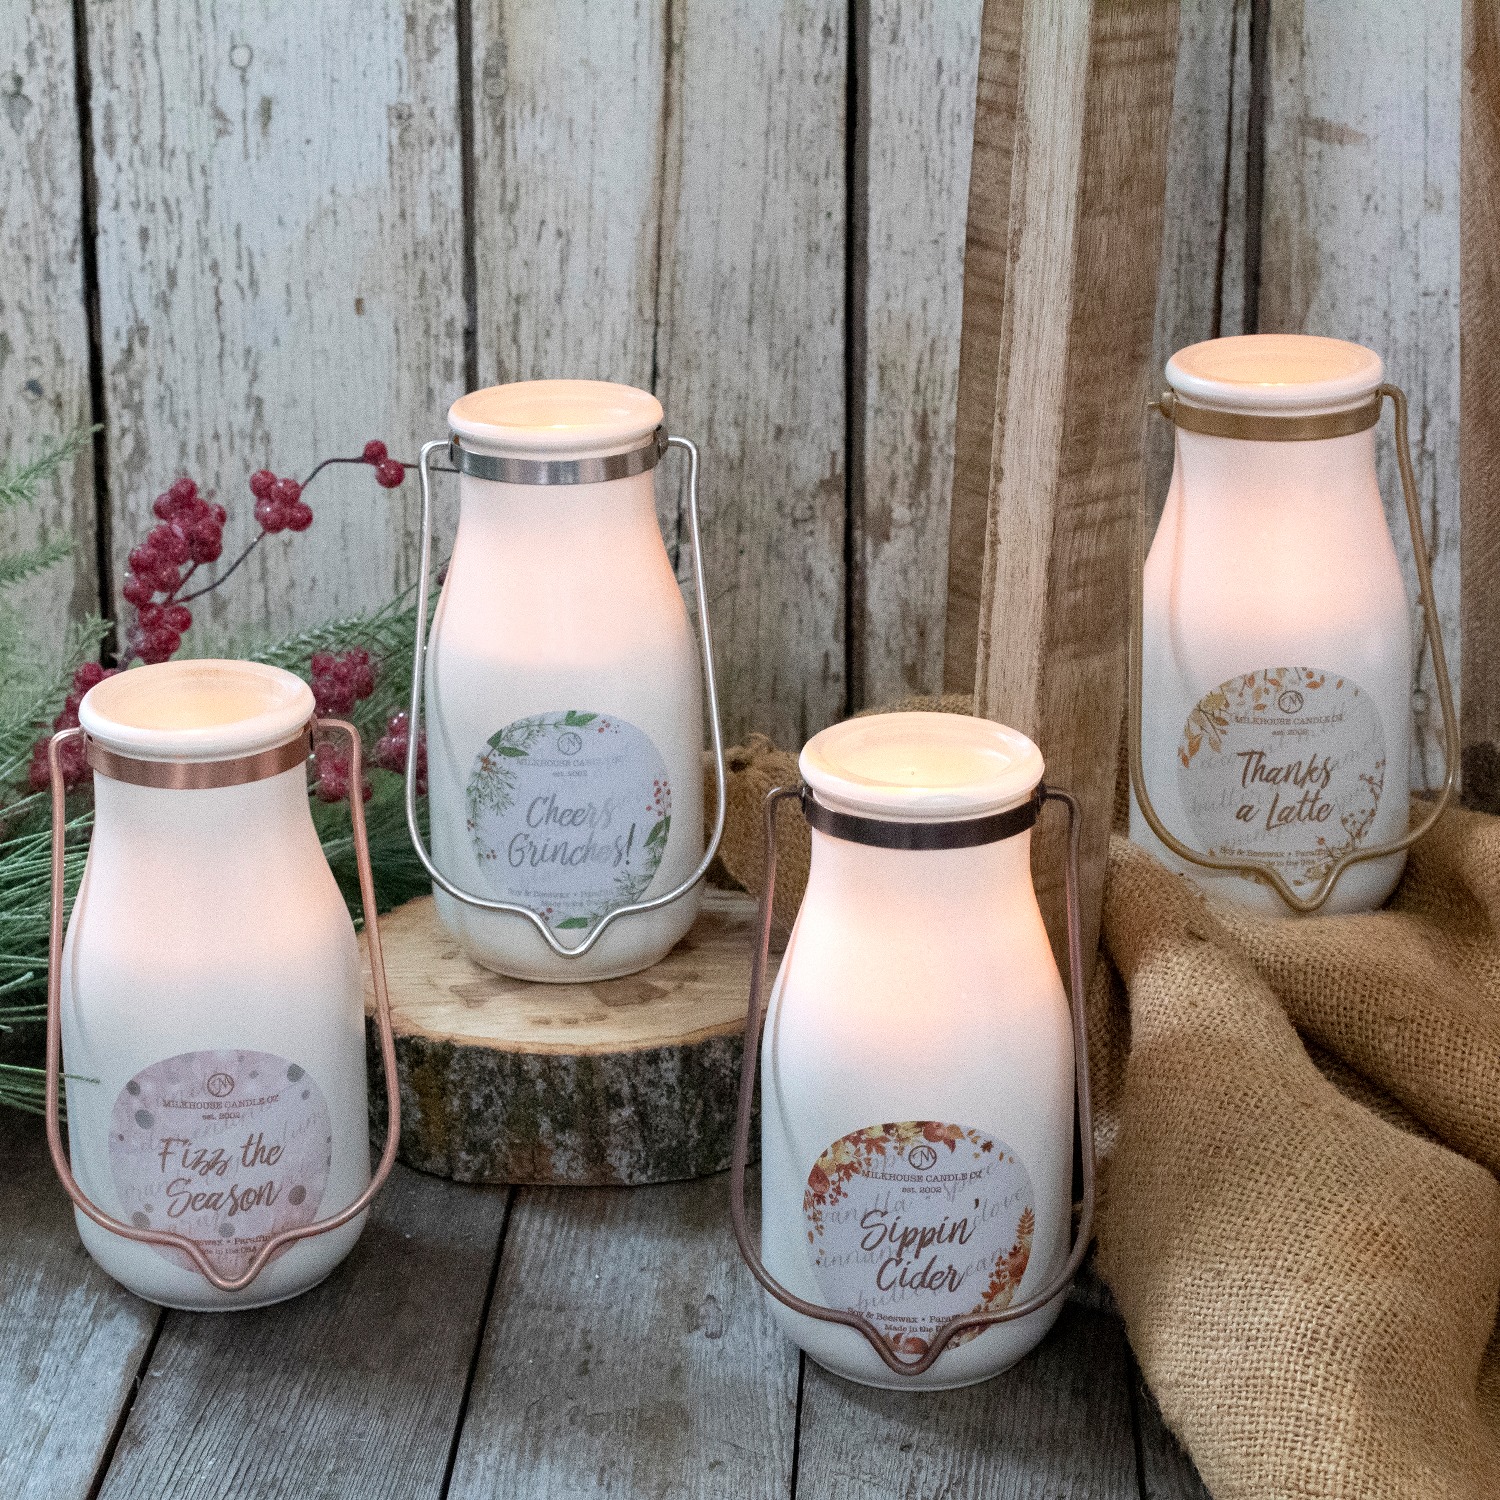 Milkhouse Holiday Candles